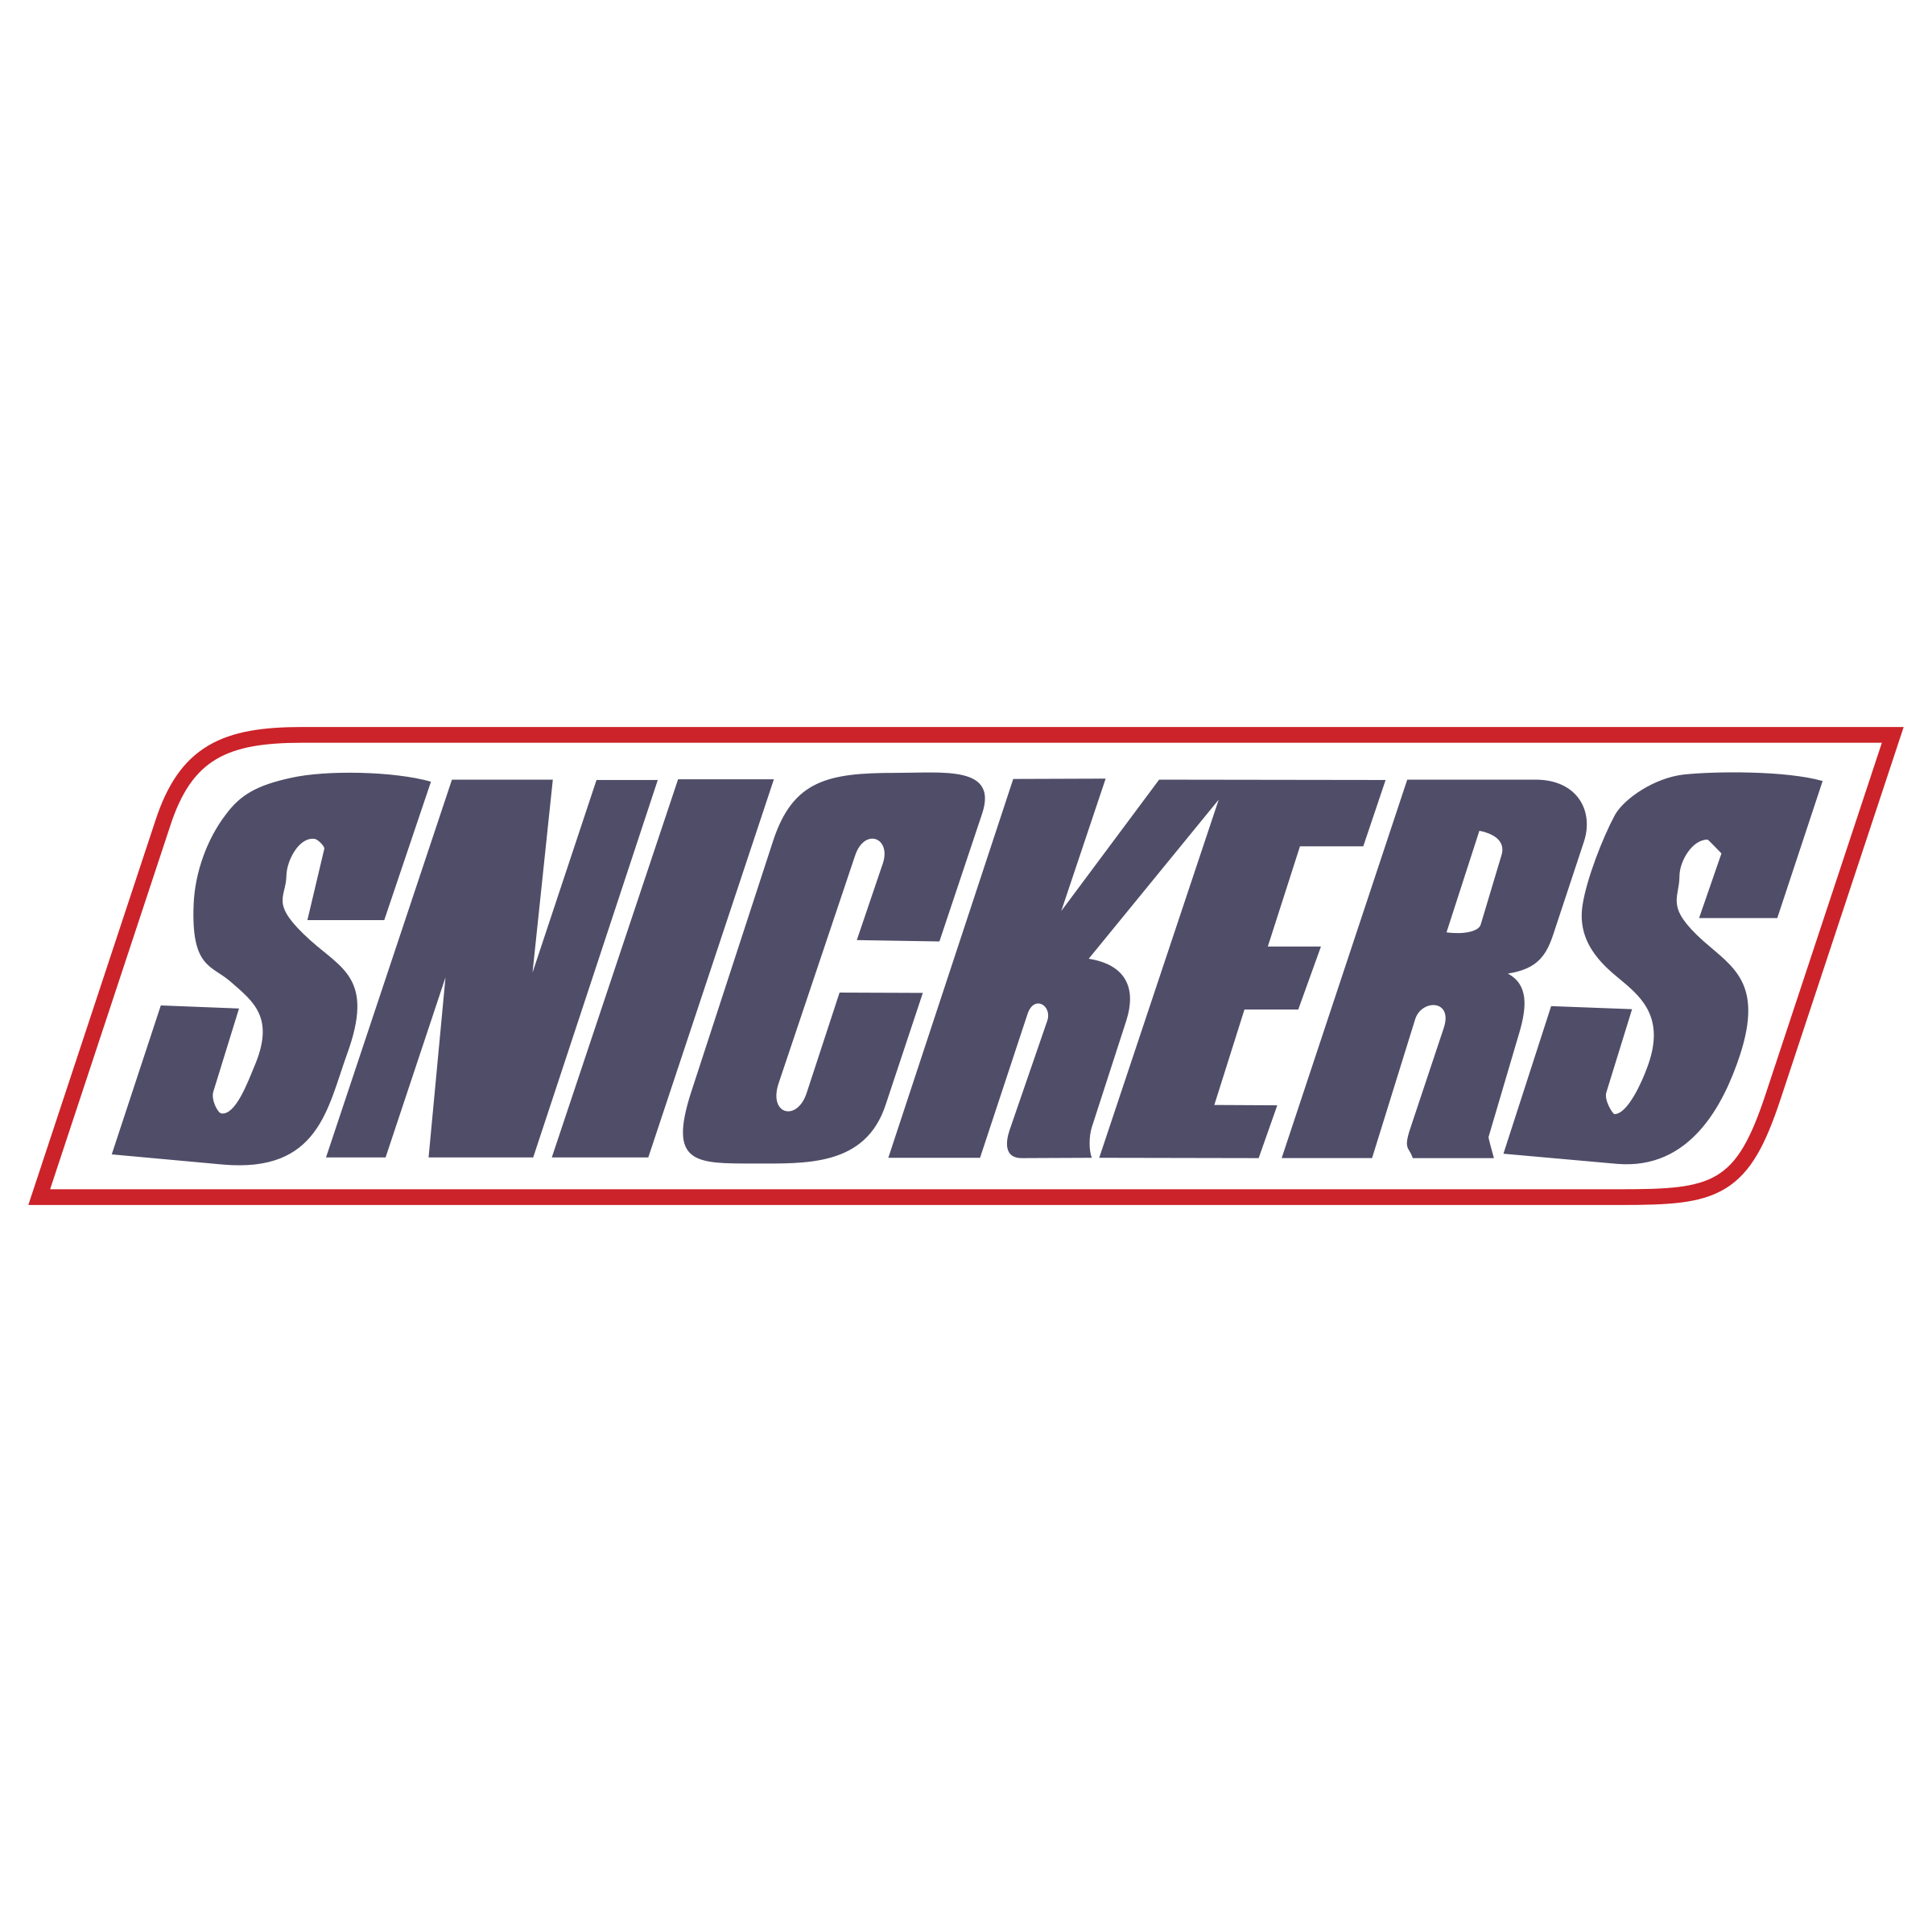 Snickers Logo - Snickers Logo PNG Transparent & SVG Vector